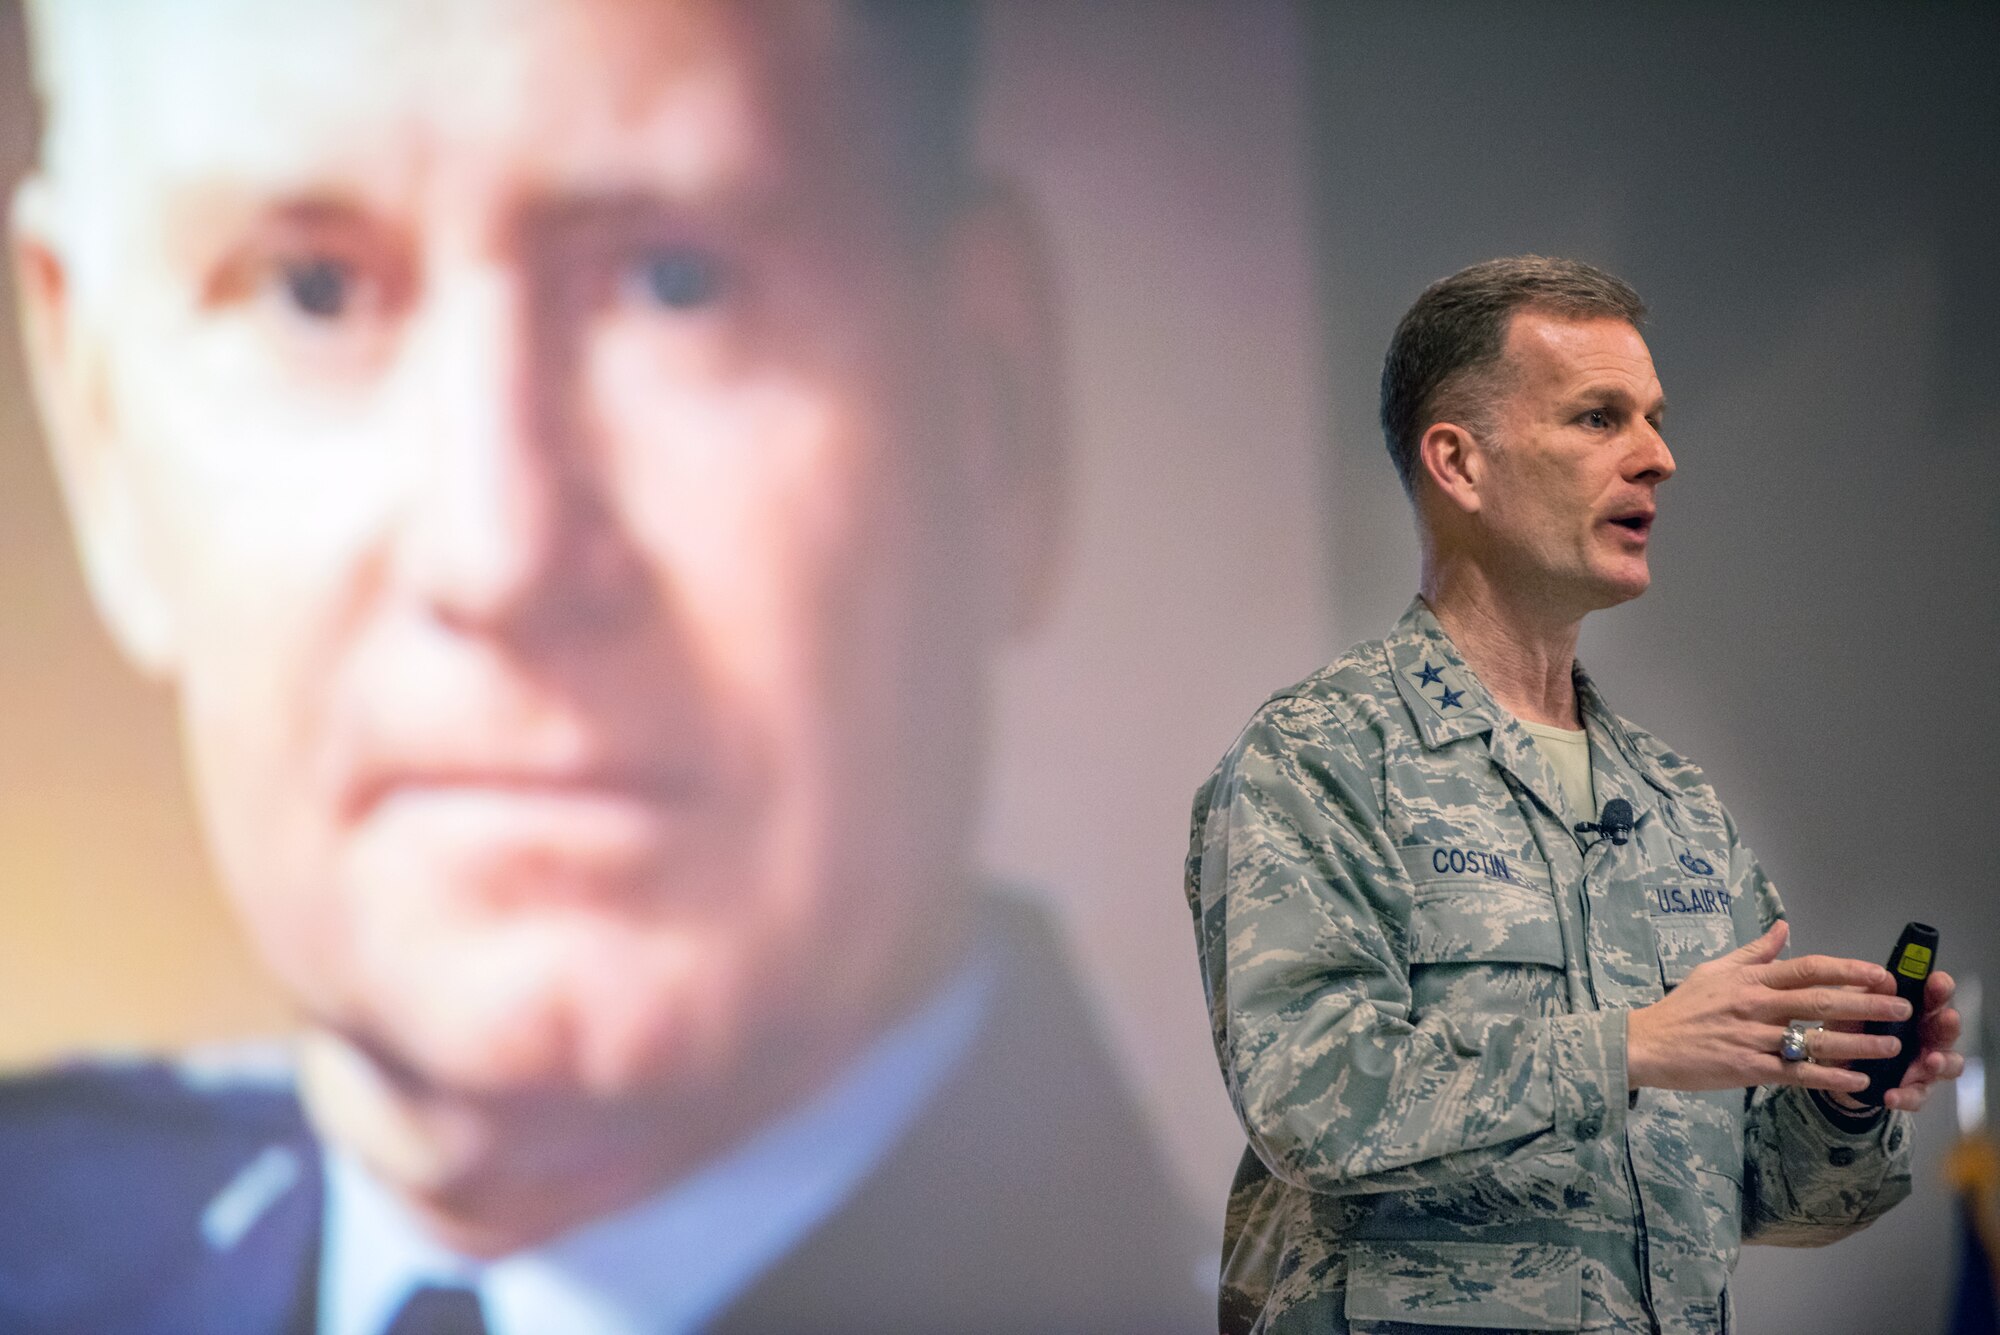 U.S. Air Force Maj. Gen. Dondi E. Costin, Chief of Chaplains, Headquarters U.S. Air Force, gives a presentation at an all call during his tour of Travis Air Force Base, Calif., Feb. 22, 2018. Costin is on a two-day tour of Travis visiting several units and meeting with Airmen. (U.S. Air Force photo by Louis Briscese)